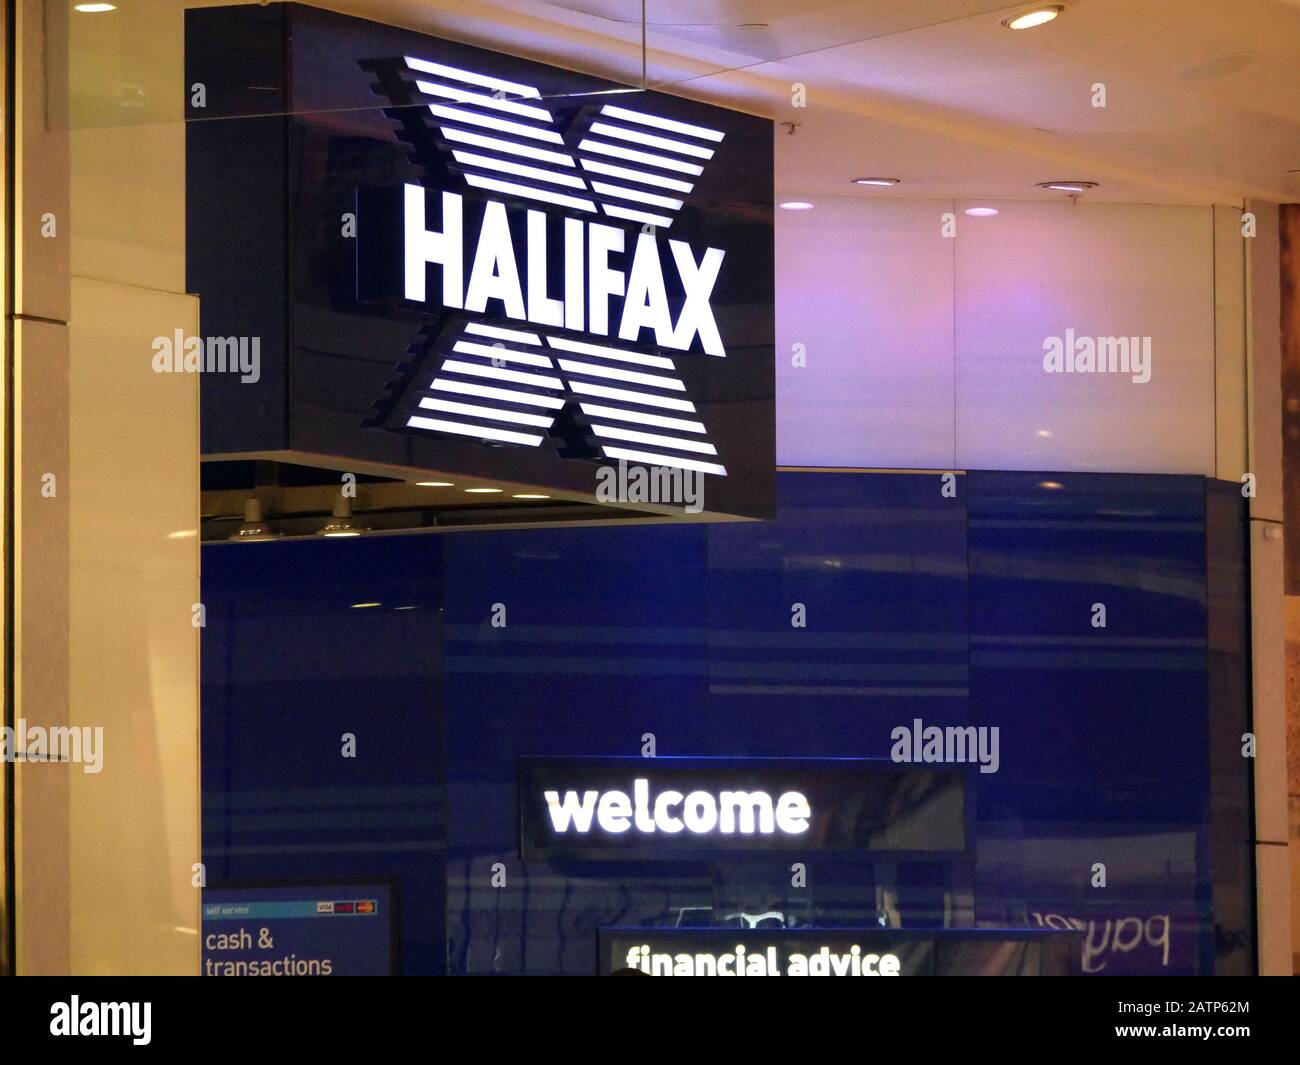 Sign for the Halifax in Westfield, White City, London, UK Stock Photo